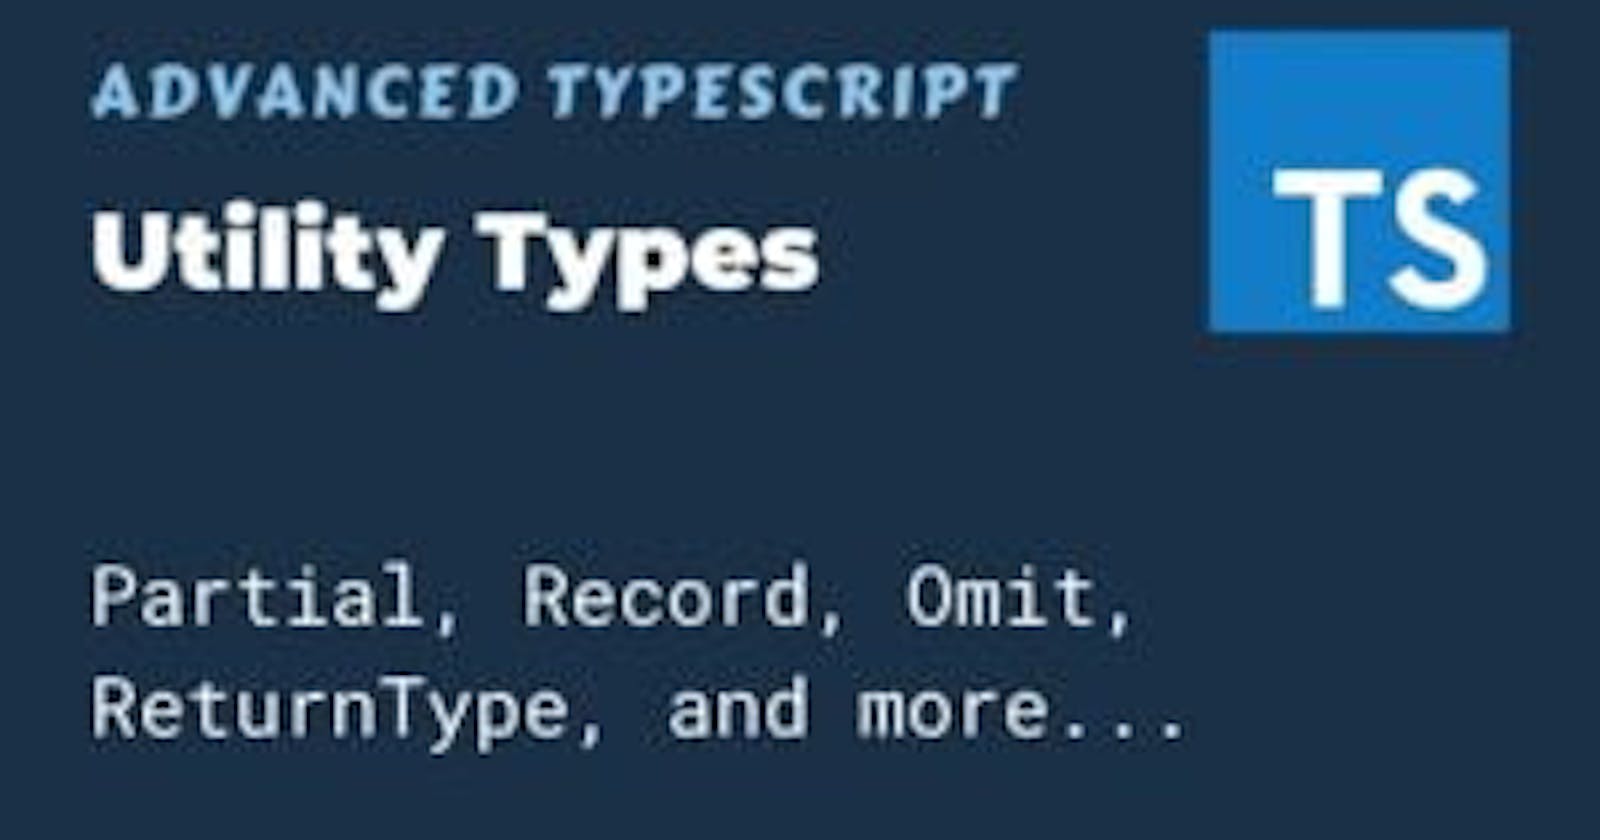 Using utility types for transforming TypeScript types